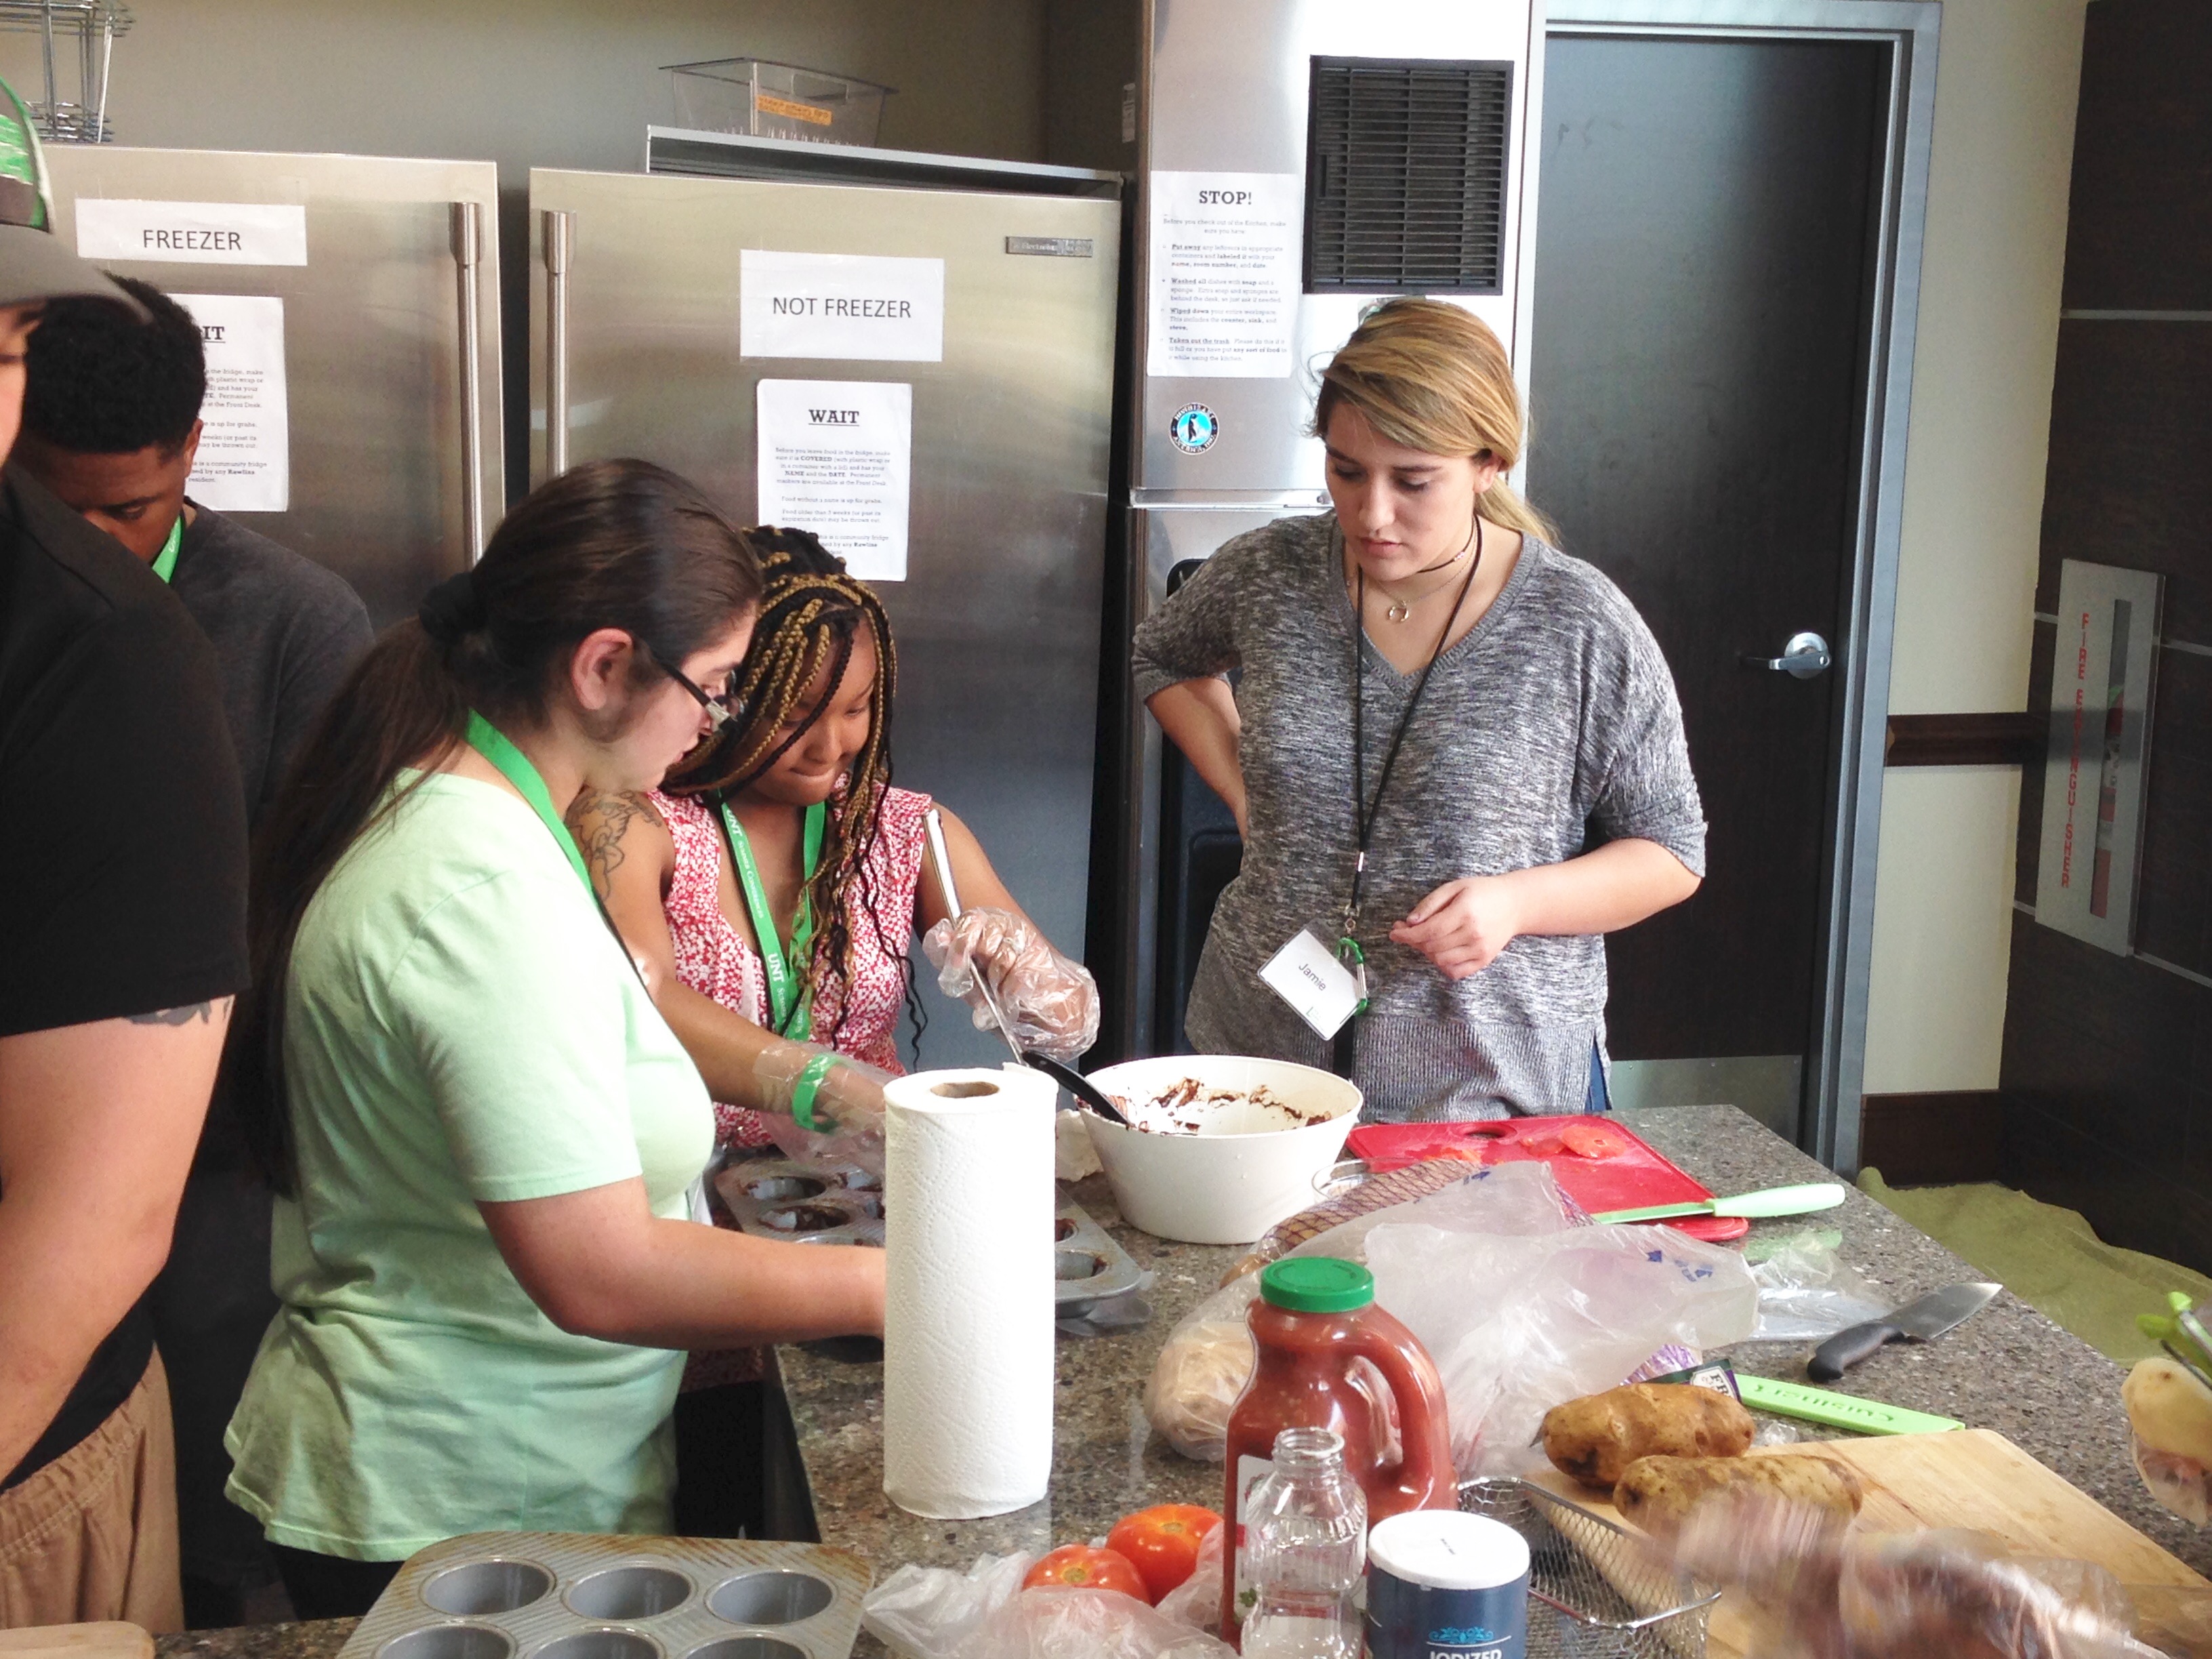 One staff and two participants preparing food in a mixing bowl.